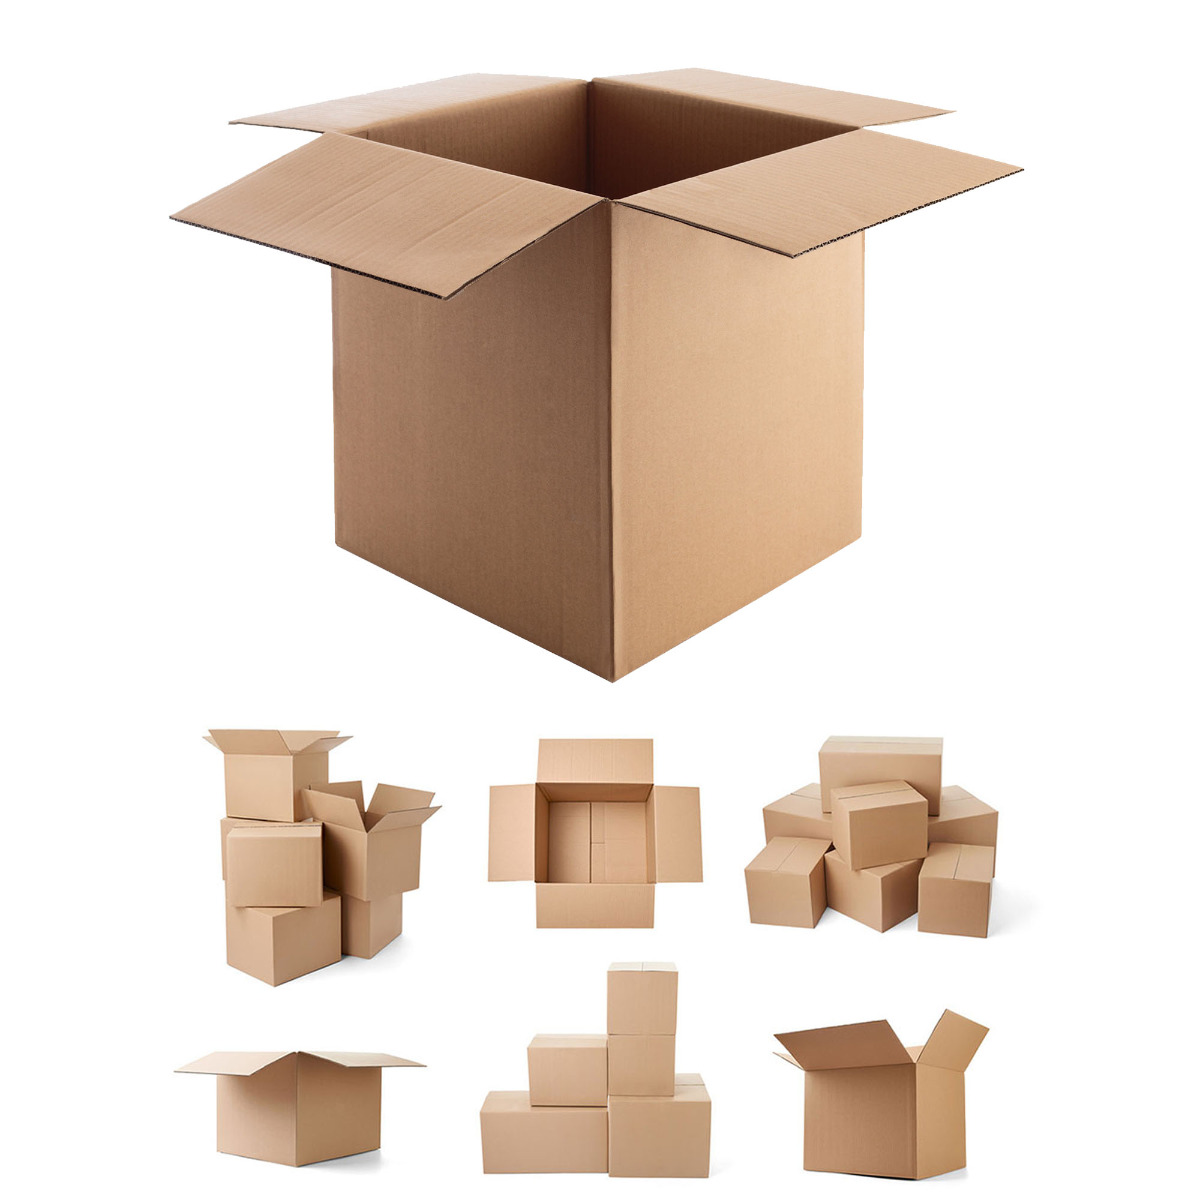 5 STRONG DOUBLE WALL CARDBOARD BOXES 12"x12"x12" Mailing Packing Postal Removal 